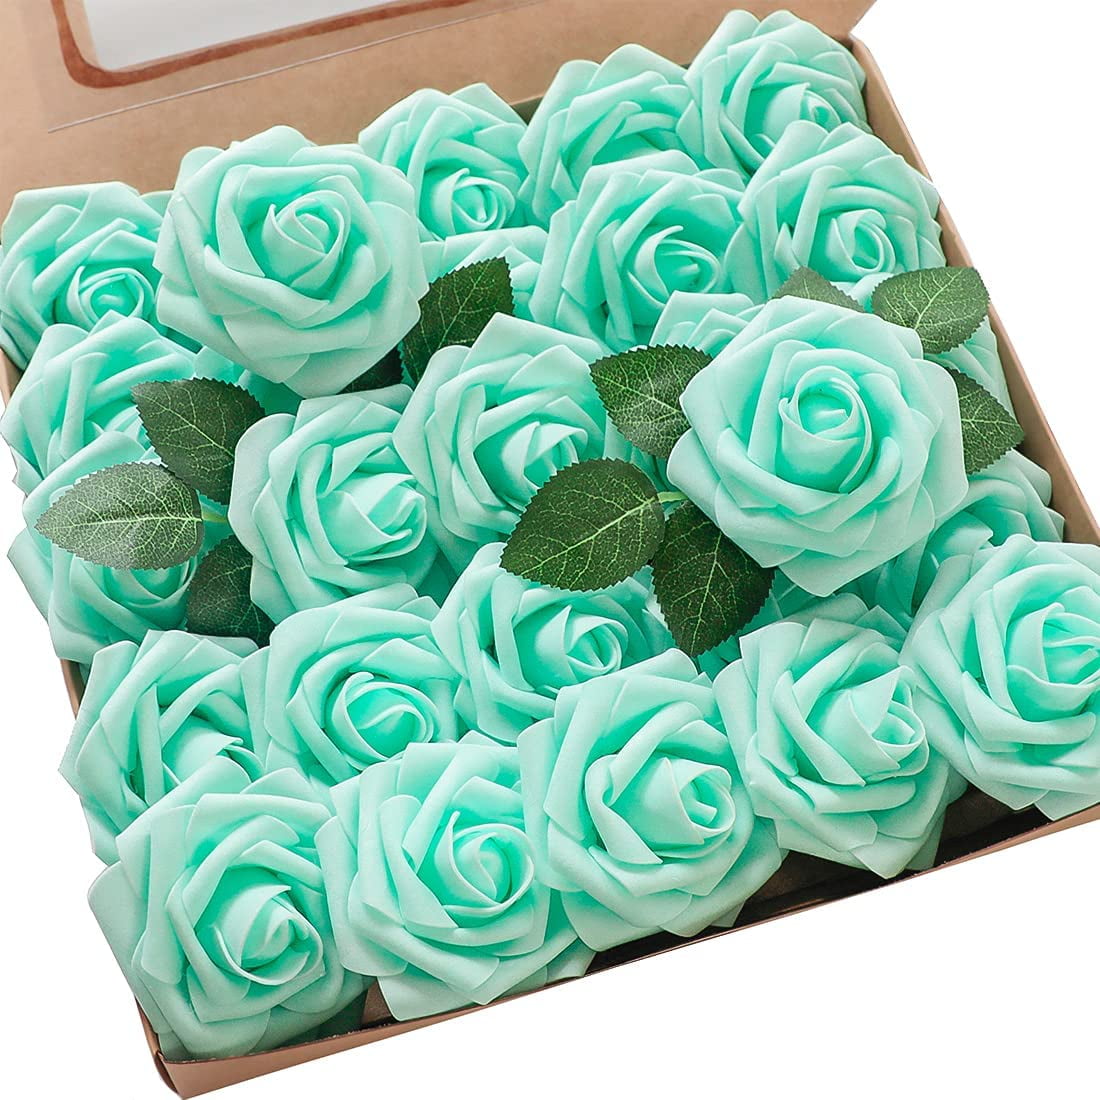 Artificial Fake Flowers Wedding Any Party Quality Soft Colourfast Foam Roses 